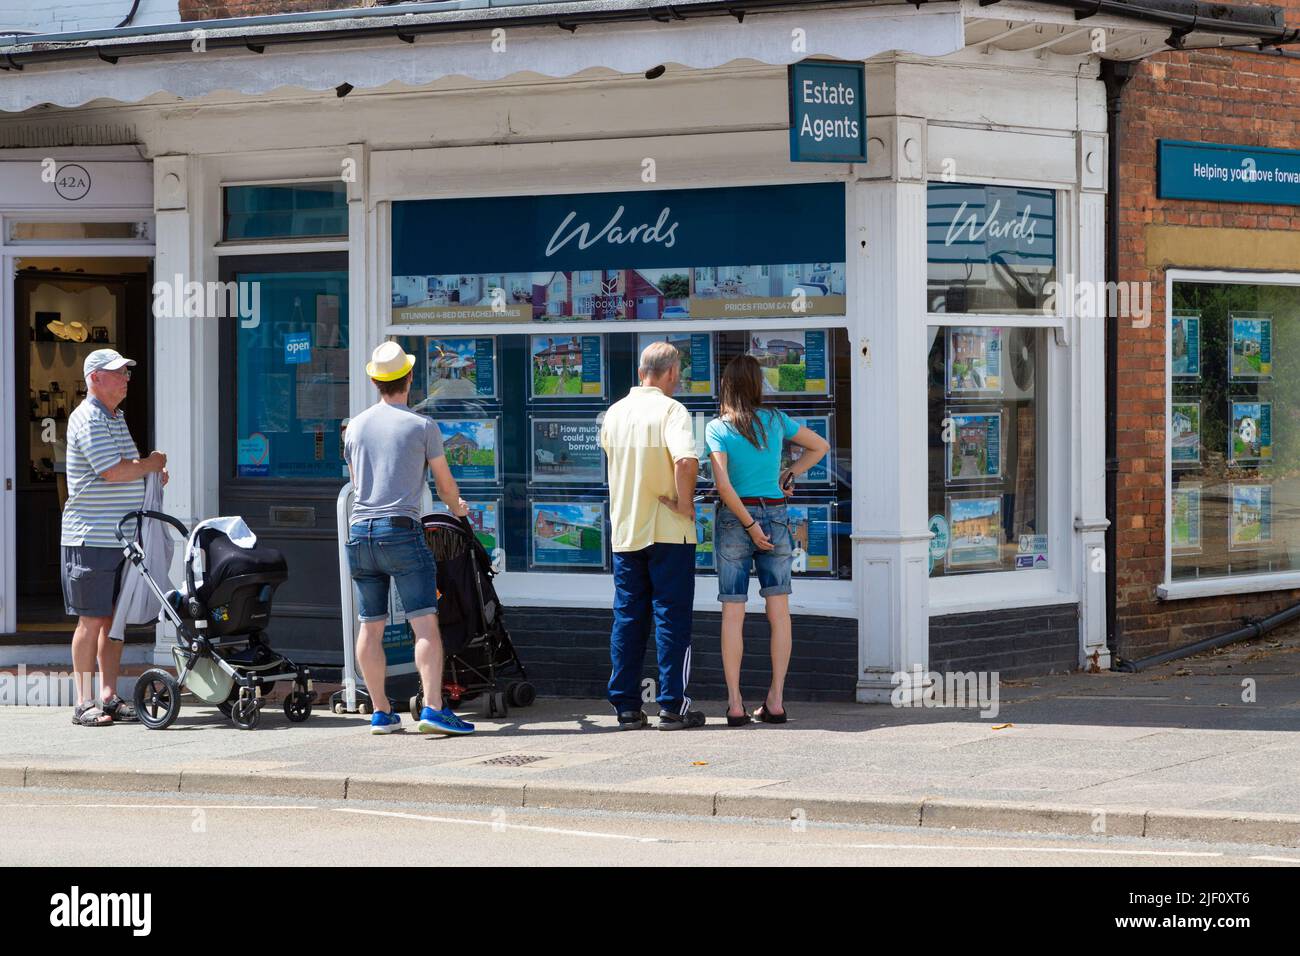 Man with a pushchair stroller and couple looking at an estate agents window, wards, tenterden, kent, uk Stock Photo